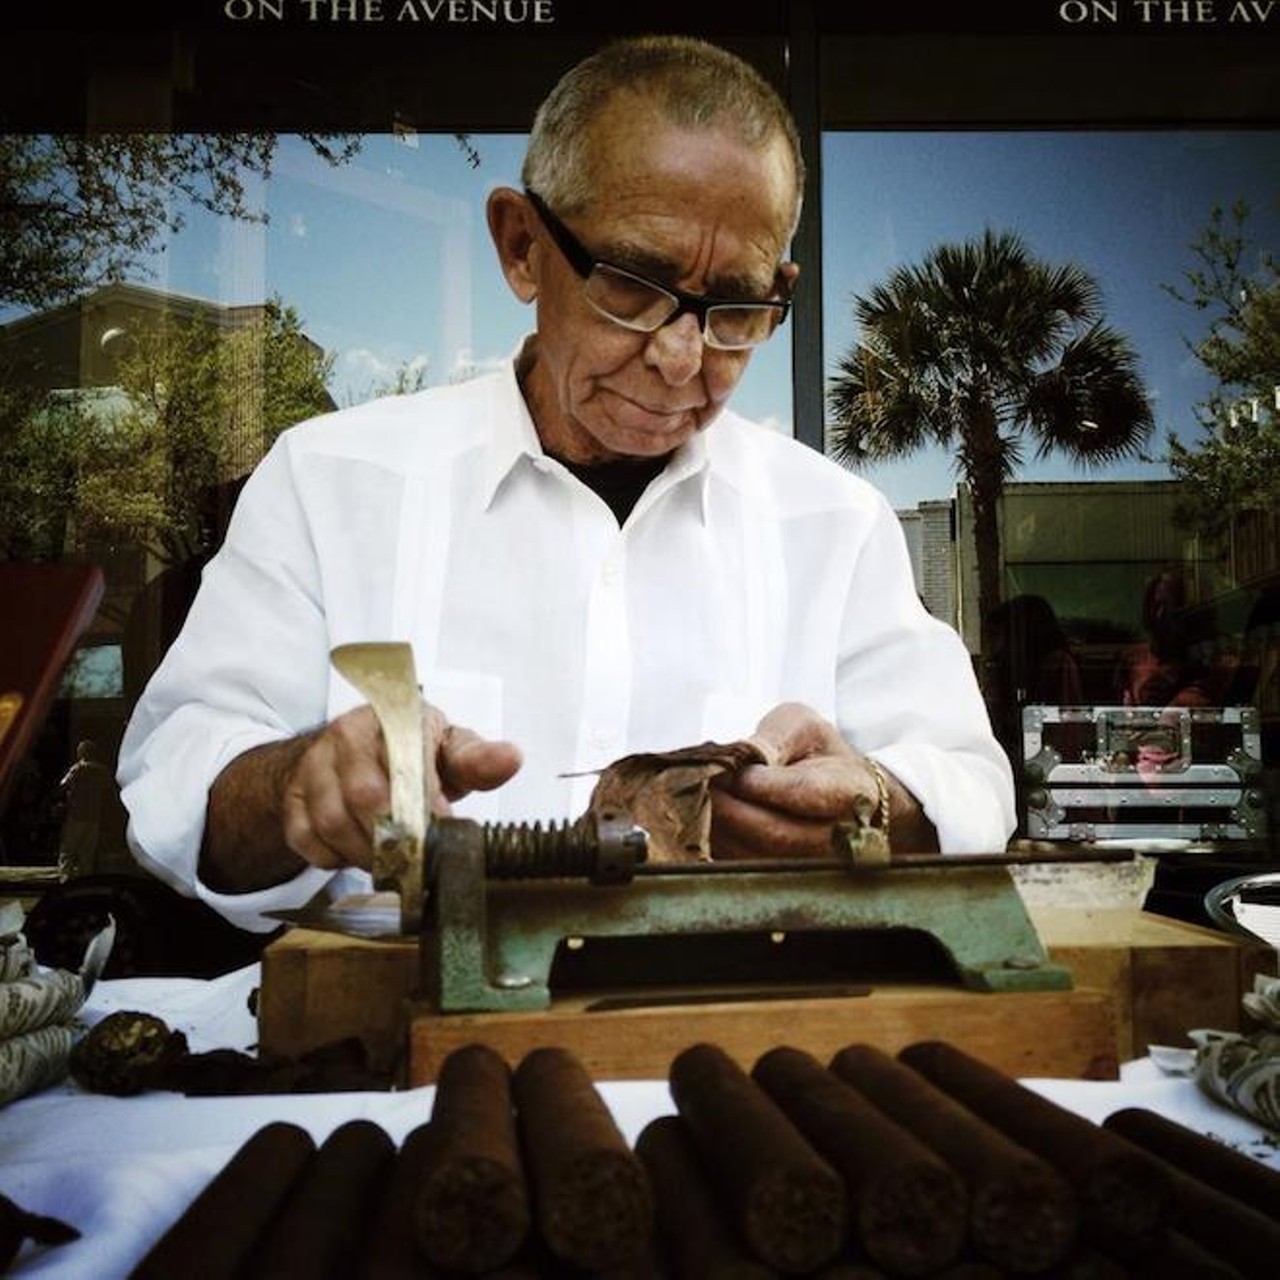 A man rolls cigars on Park Avenue in Winter Park